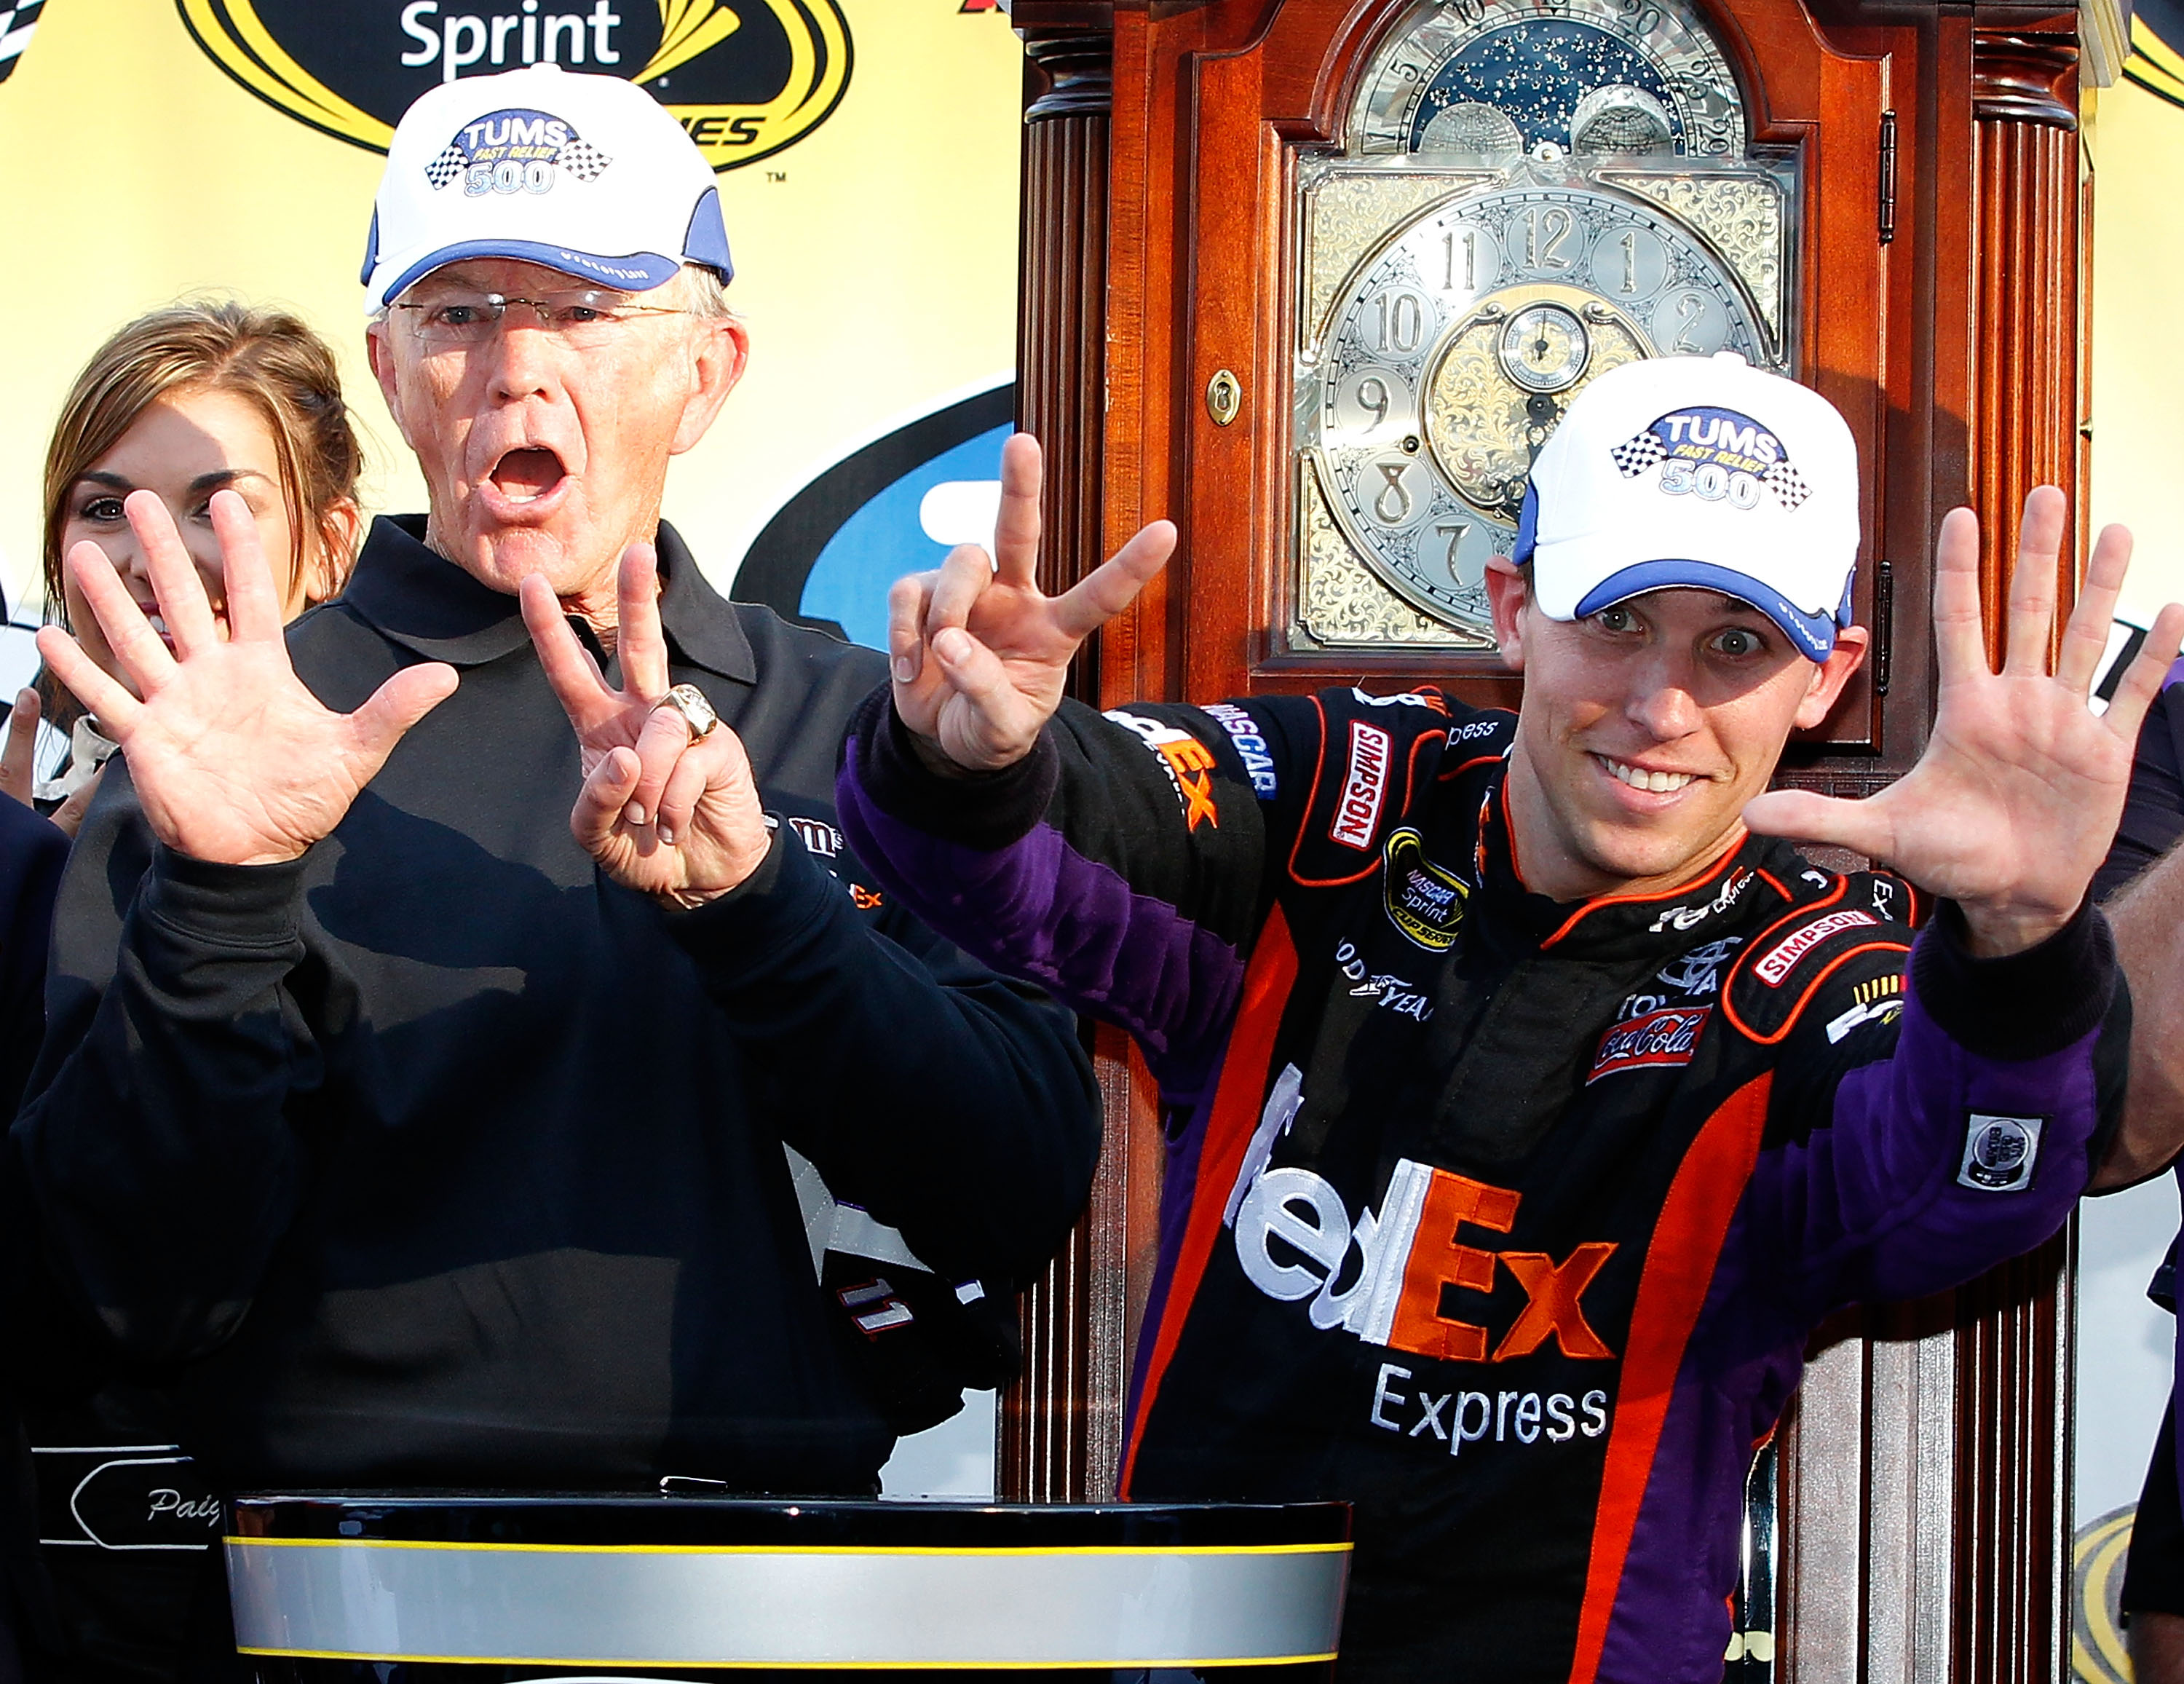 MARTINSVILLE, VA - OCTOBER 24: Denny Hamlin (R), driver of the #11 FedEx Express Toyota, celebrates with car owner Joe Gibbs (L), in victory lane after winning the NASCAR Sprint Cup Series TUMS Fast Relief 500 at Martinsville Speedway on October 24, 2010 